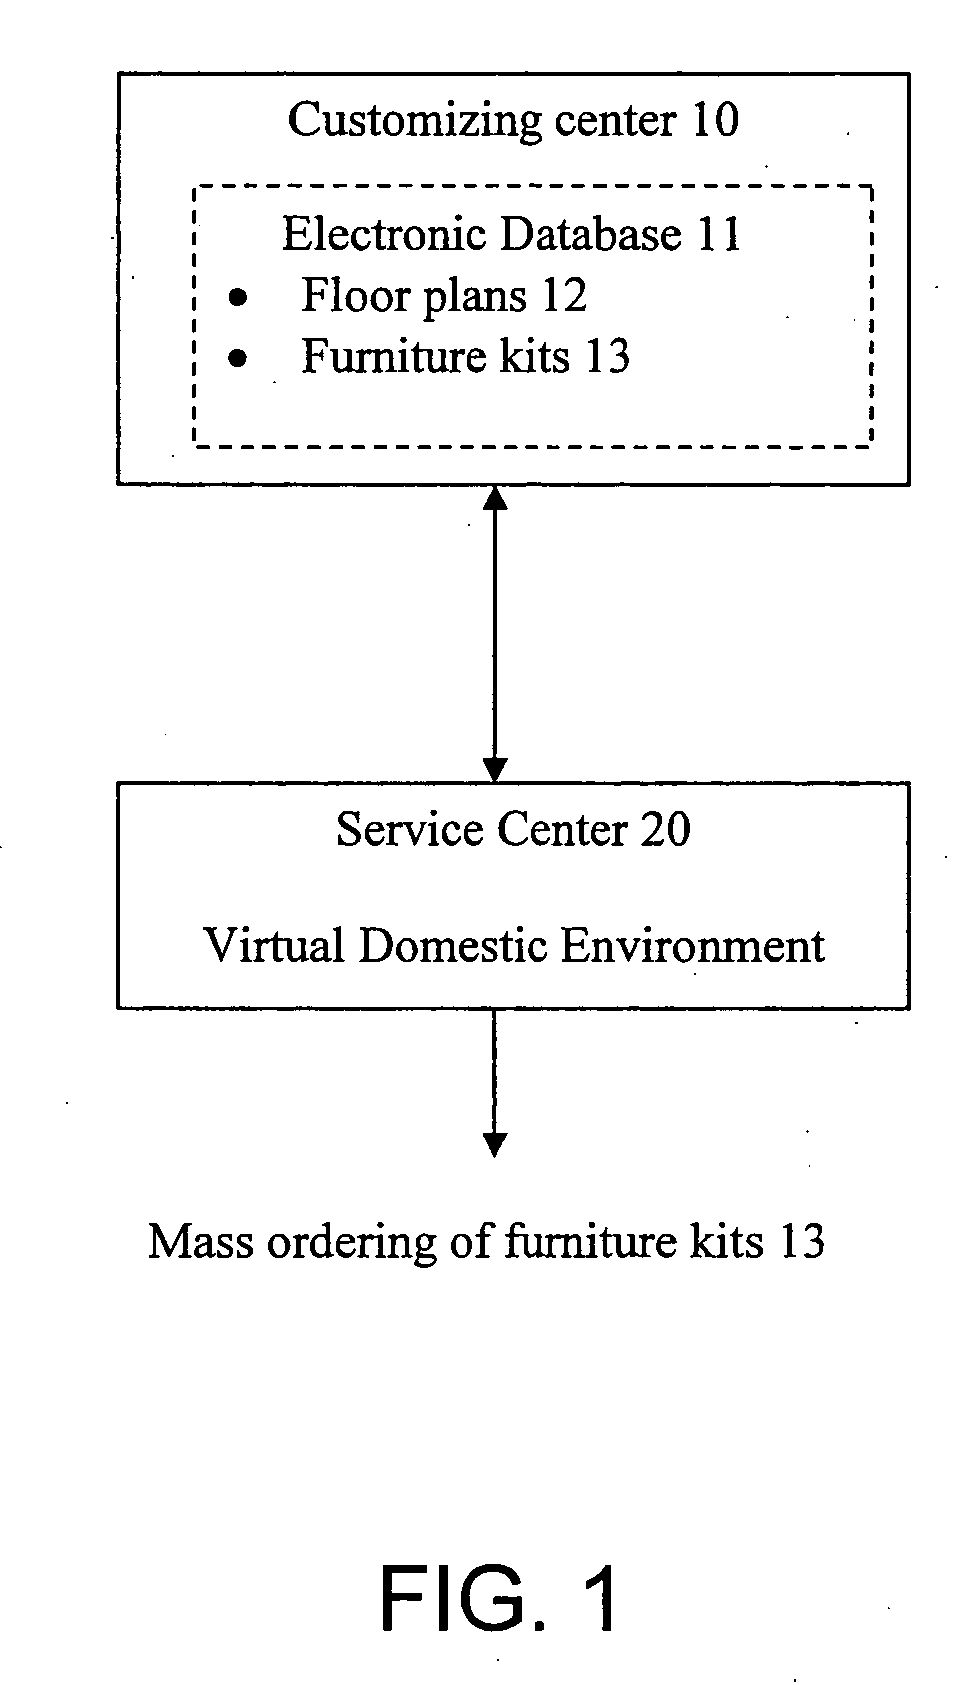 Method and system of marketing and mass producing customized domestic furniture